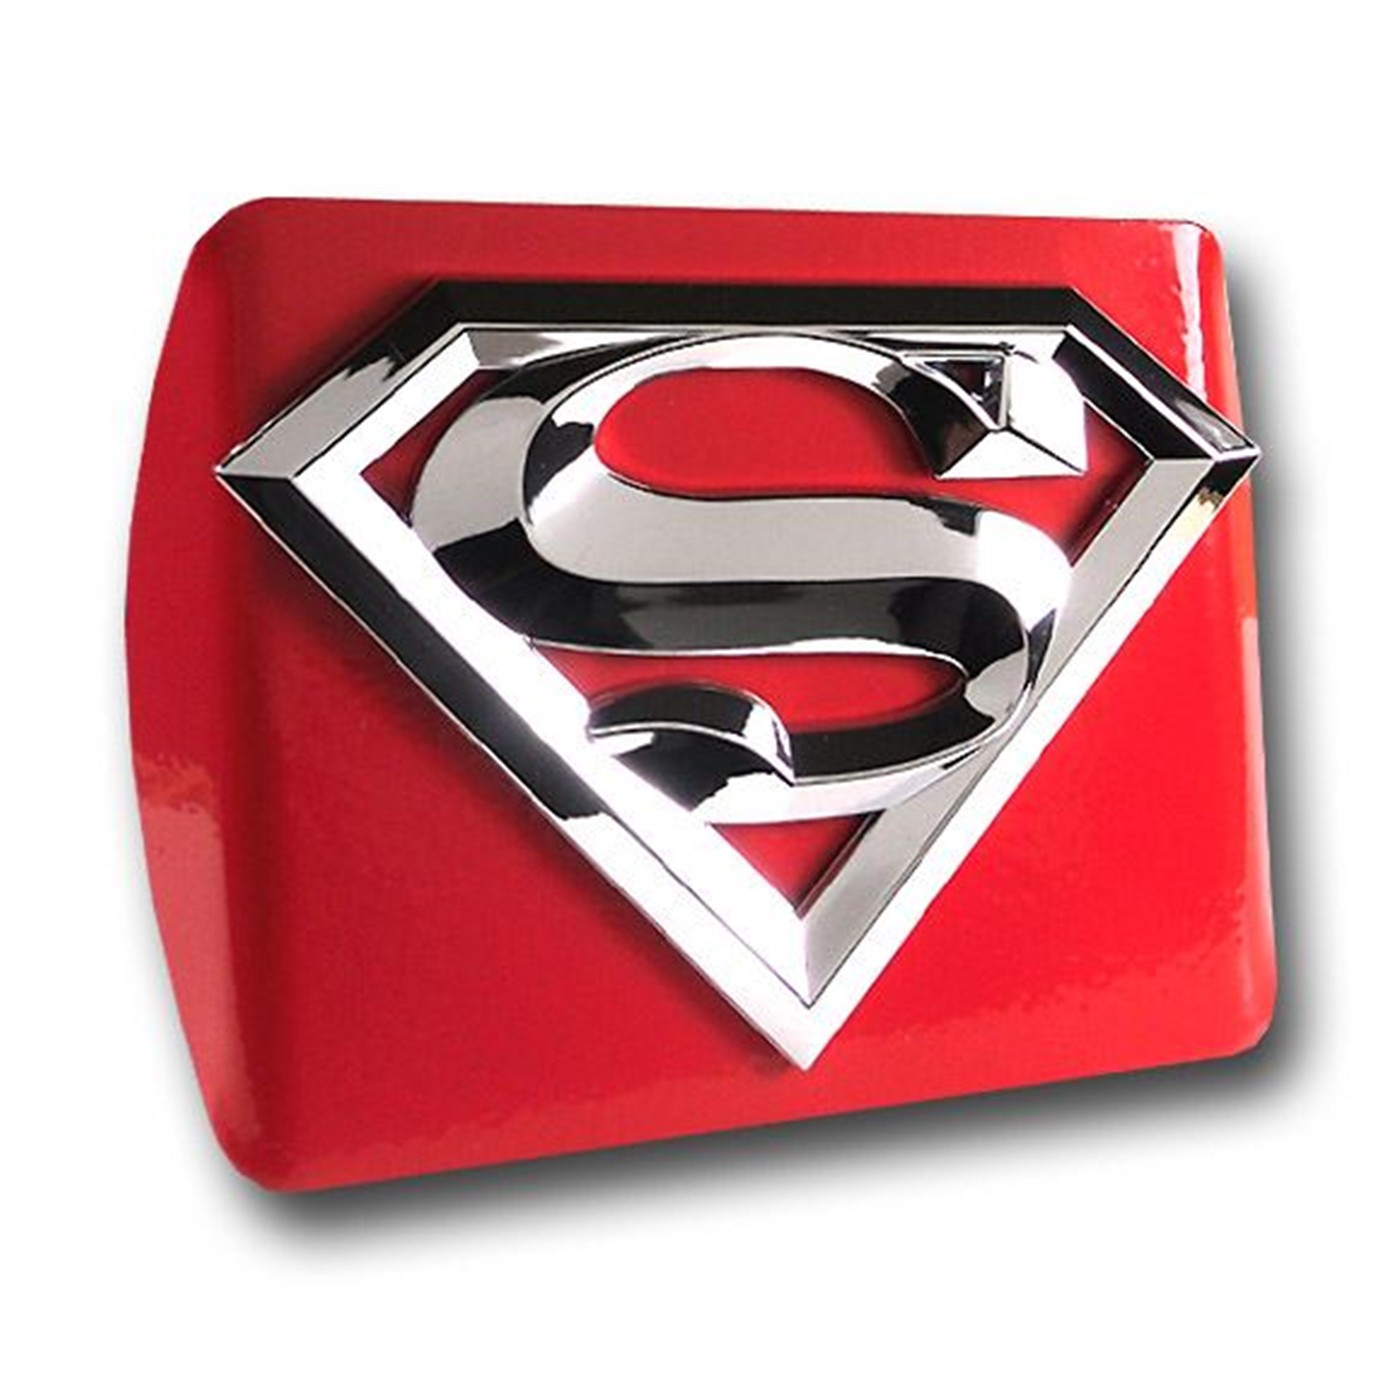 Superman 3D Chrome on Red Metal Trailer Hitch